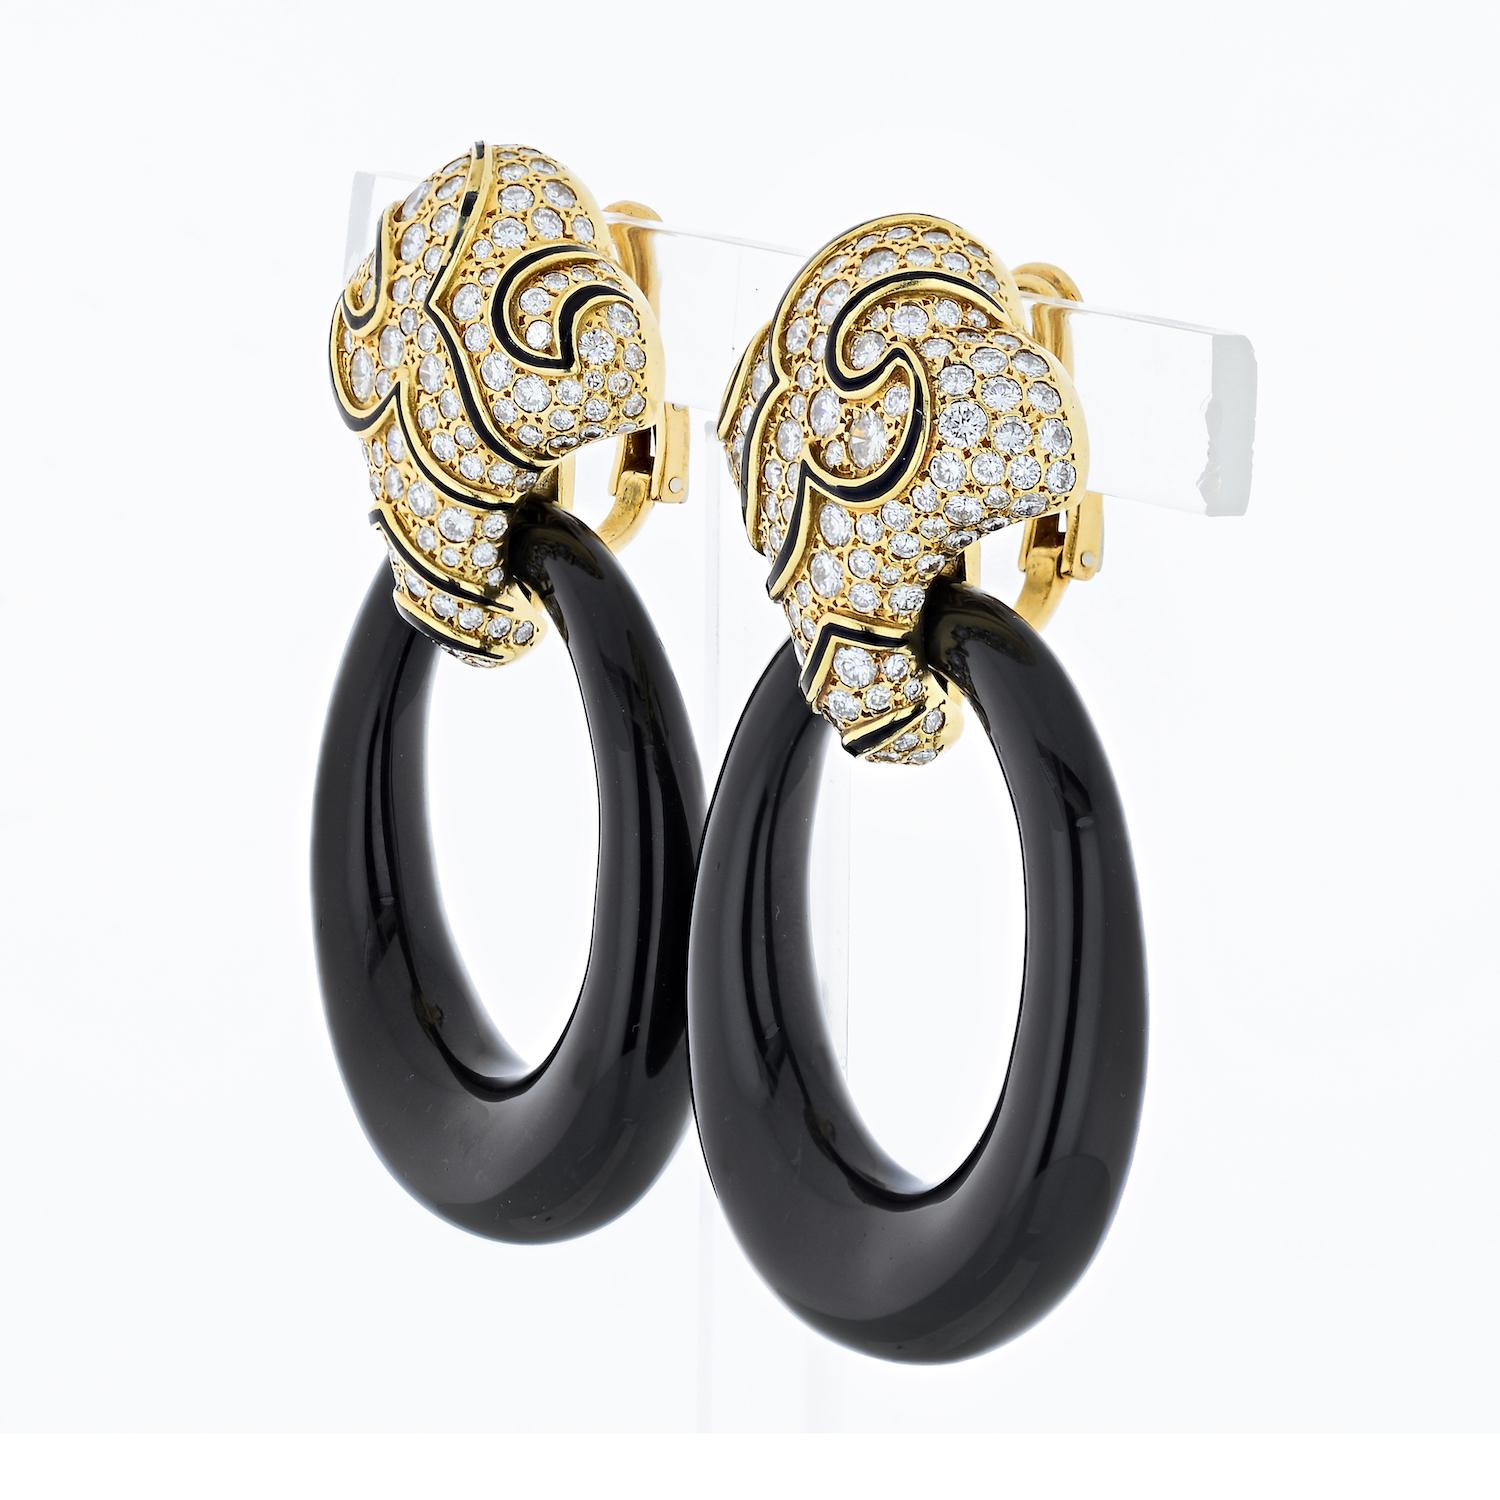 An iconic pair of ear pendants, named 'Ken' and resembling the shape of classic door knockers, mounted on 18kt yellow gold, tops are set with round cut diamonds between the black onyx scrolls, and smooth oval onyx door-knockers suspended from the